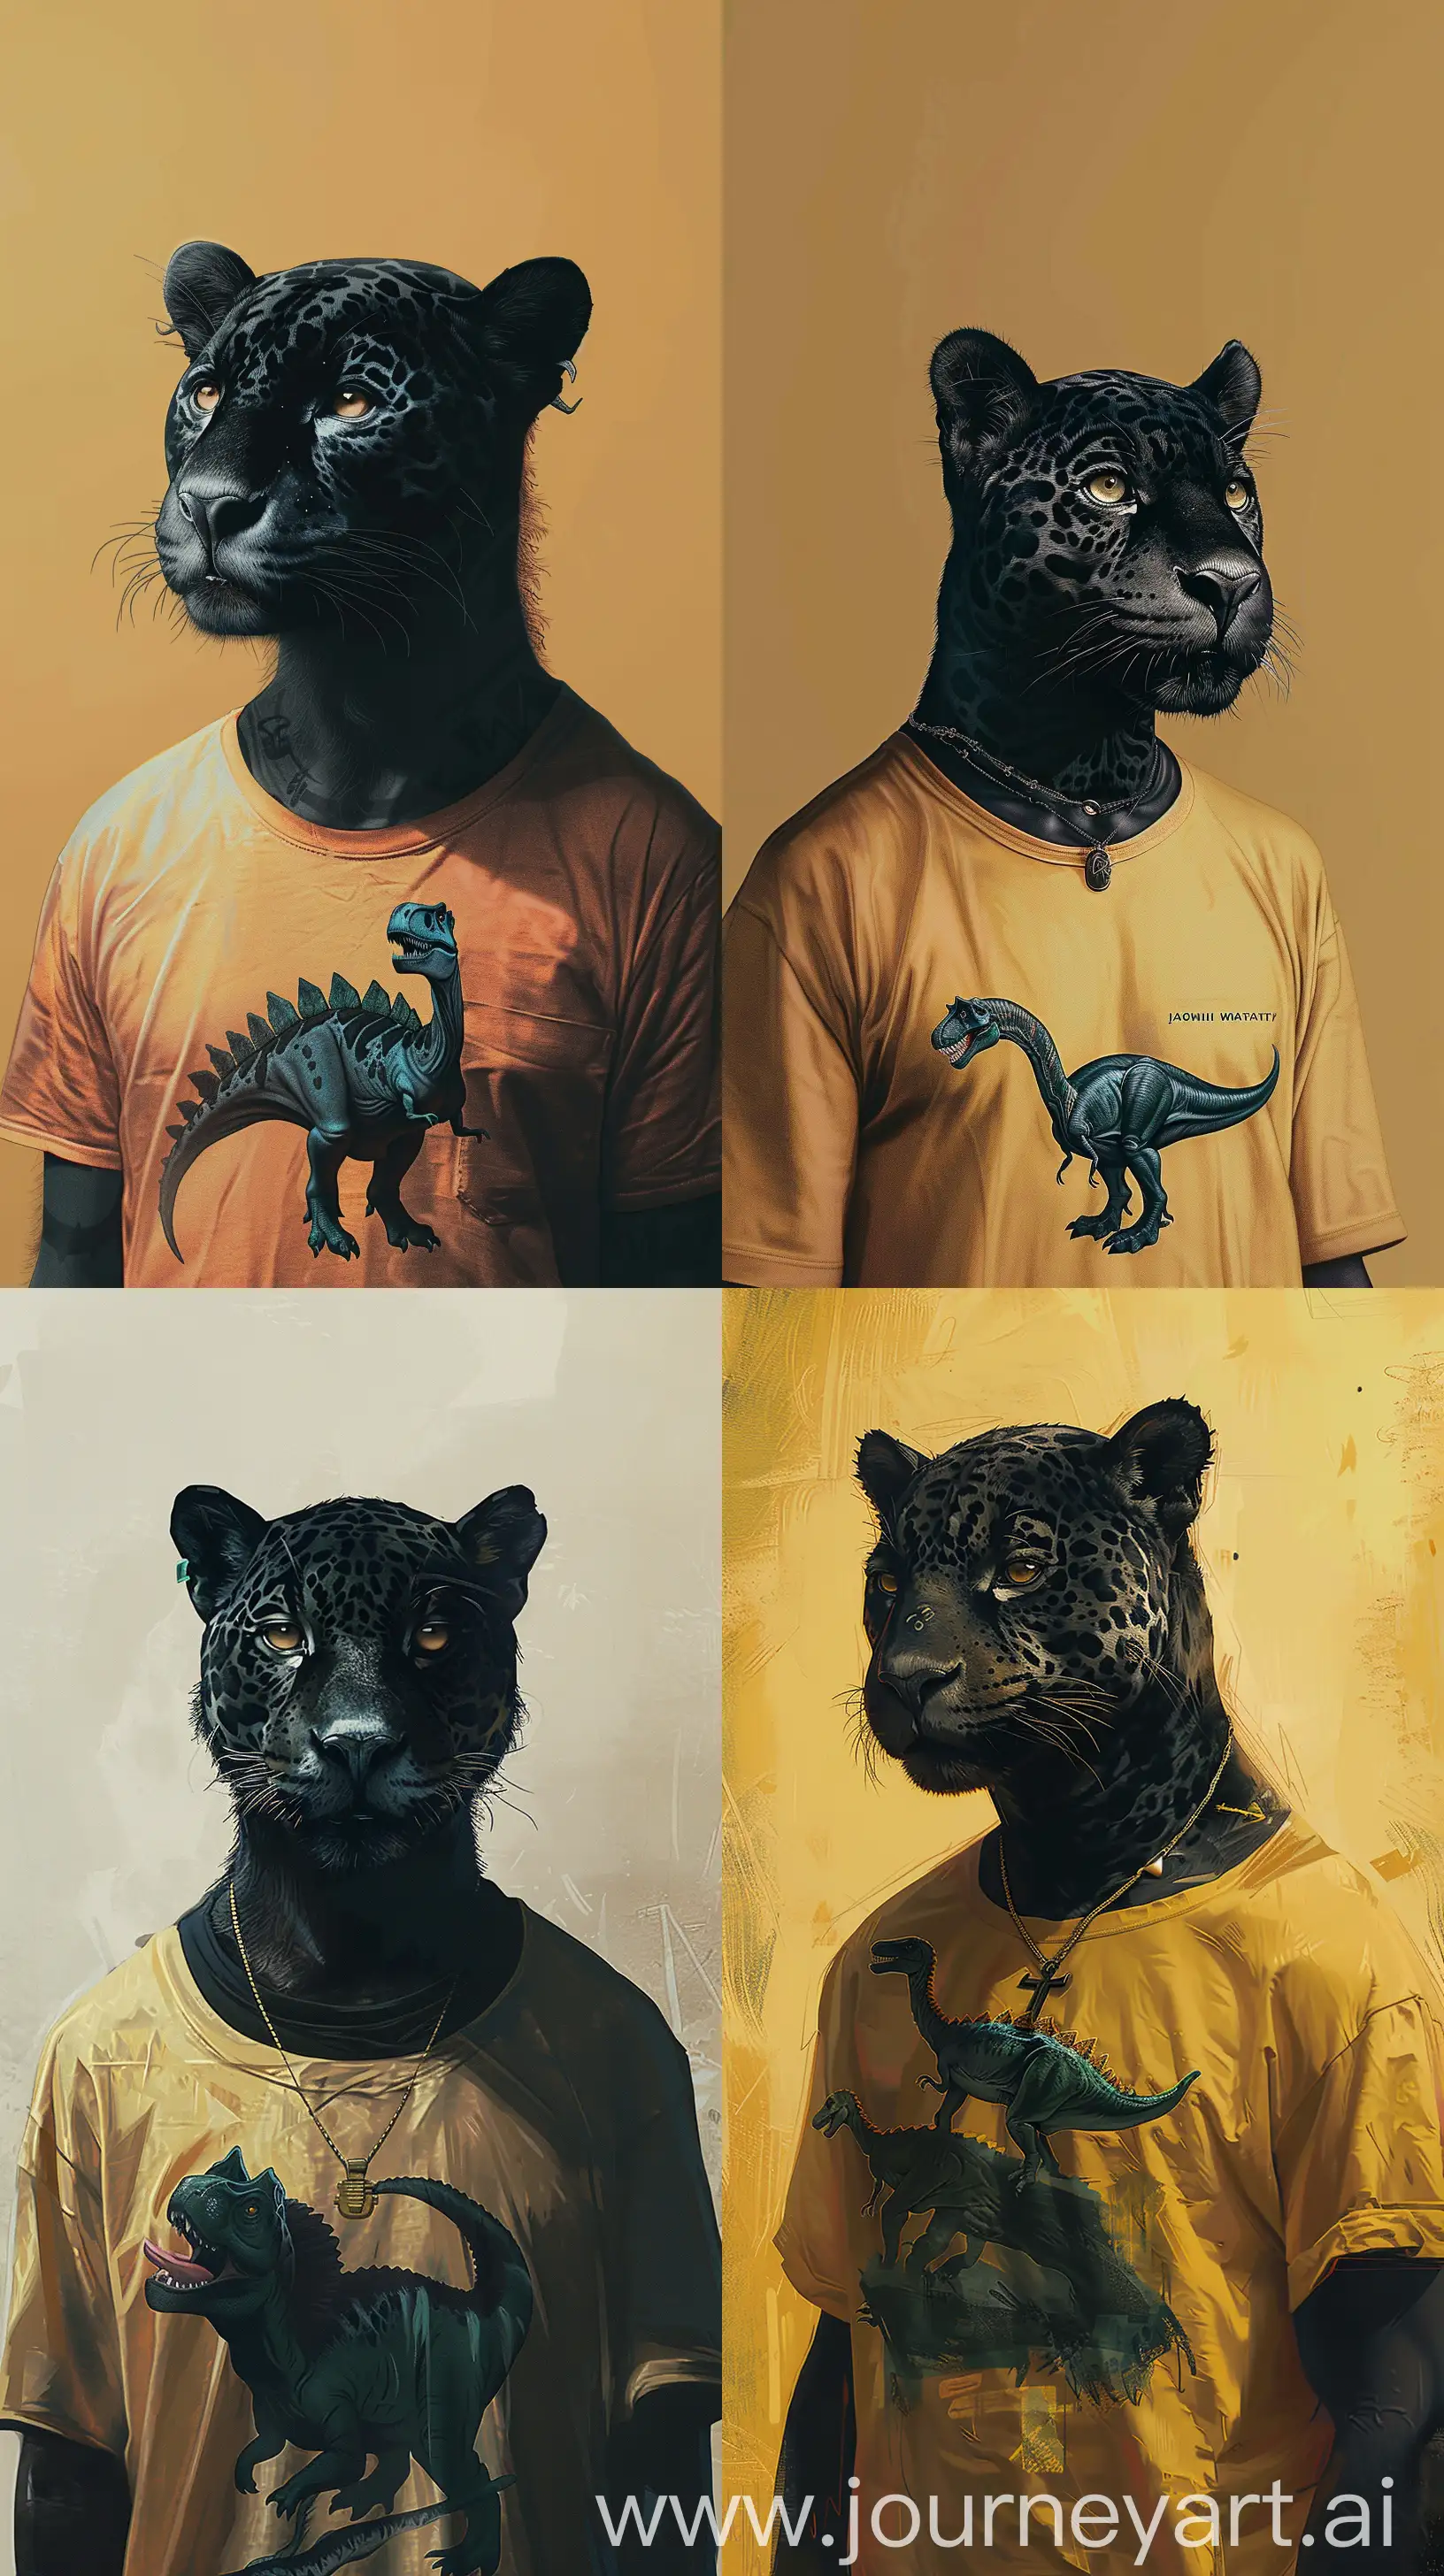 William wray art style of a black jaguar as a man wearing a t shirt with dinosaur on it , as phone wallpaper, 8k uhd maximalist details. --ar 9:16